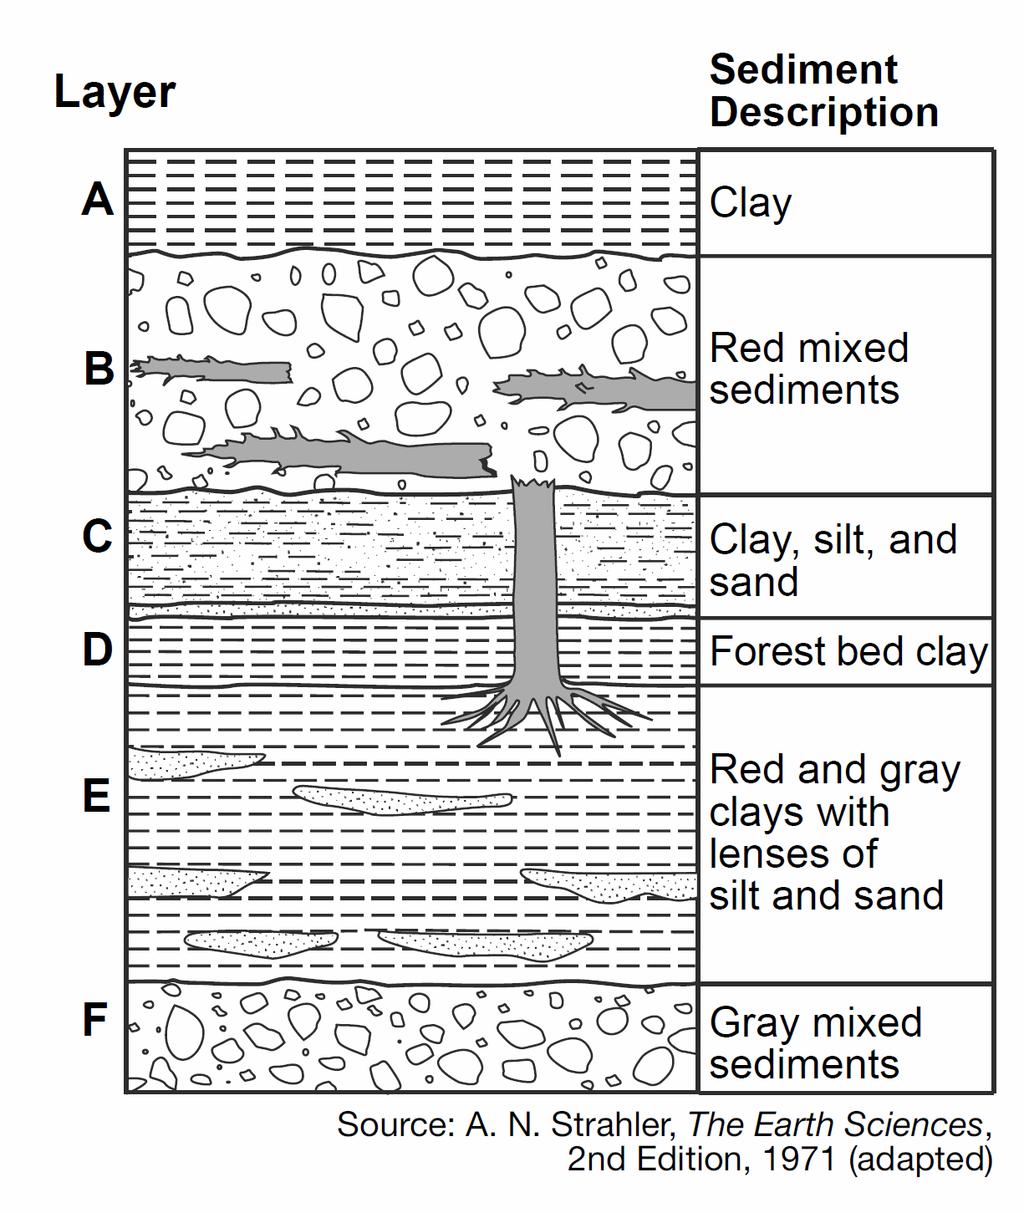 51. The cross section below shows layers of sediments deposited in a region of Wisconsin that has experienced several periods of glaciation.